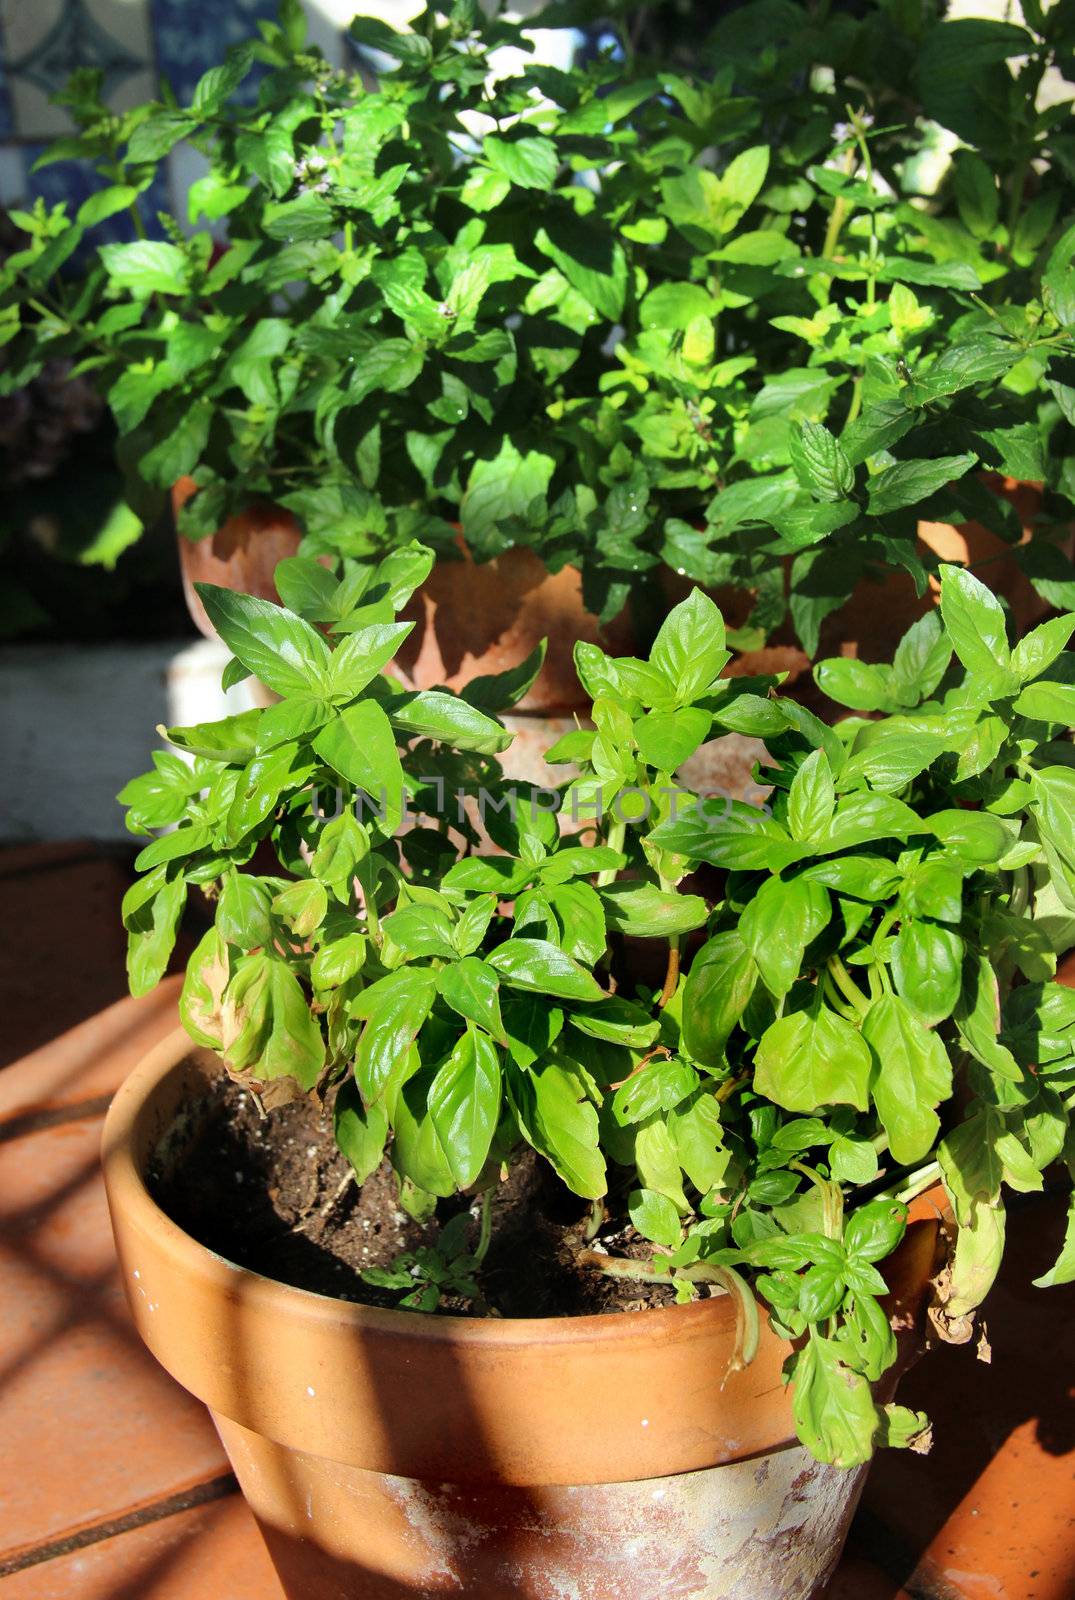 Basil and other herbs in the pot 